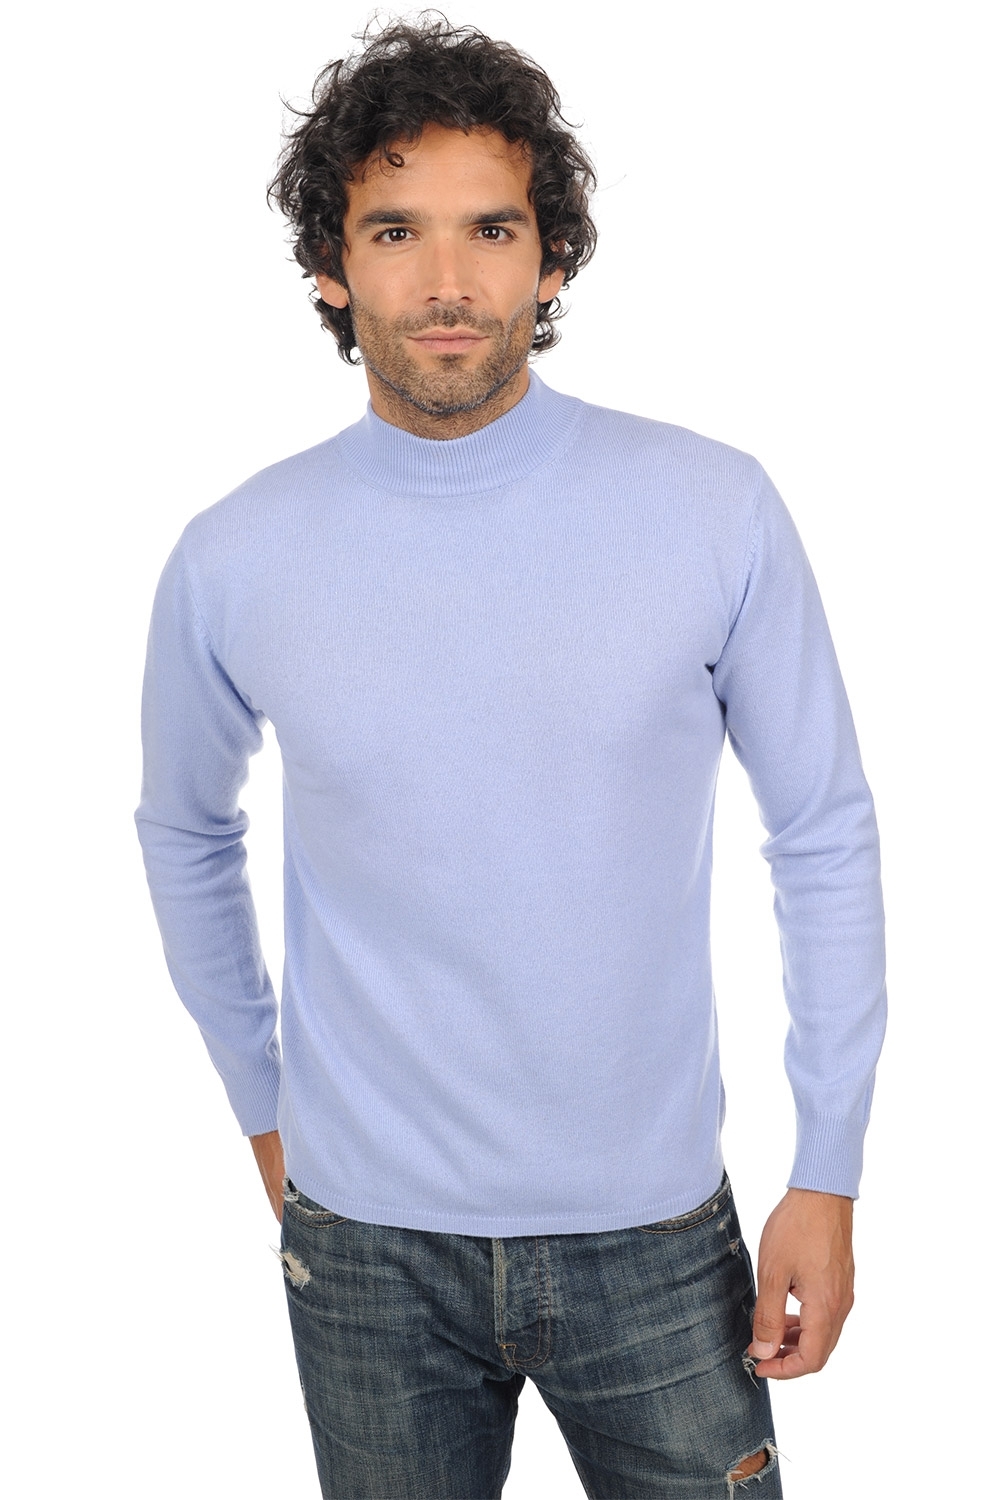 Cachemire pull homme frederic ciel 2xl